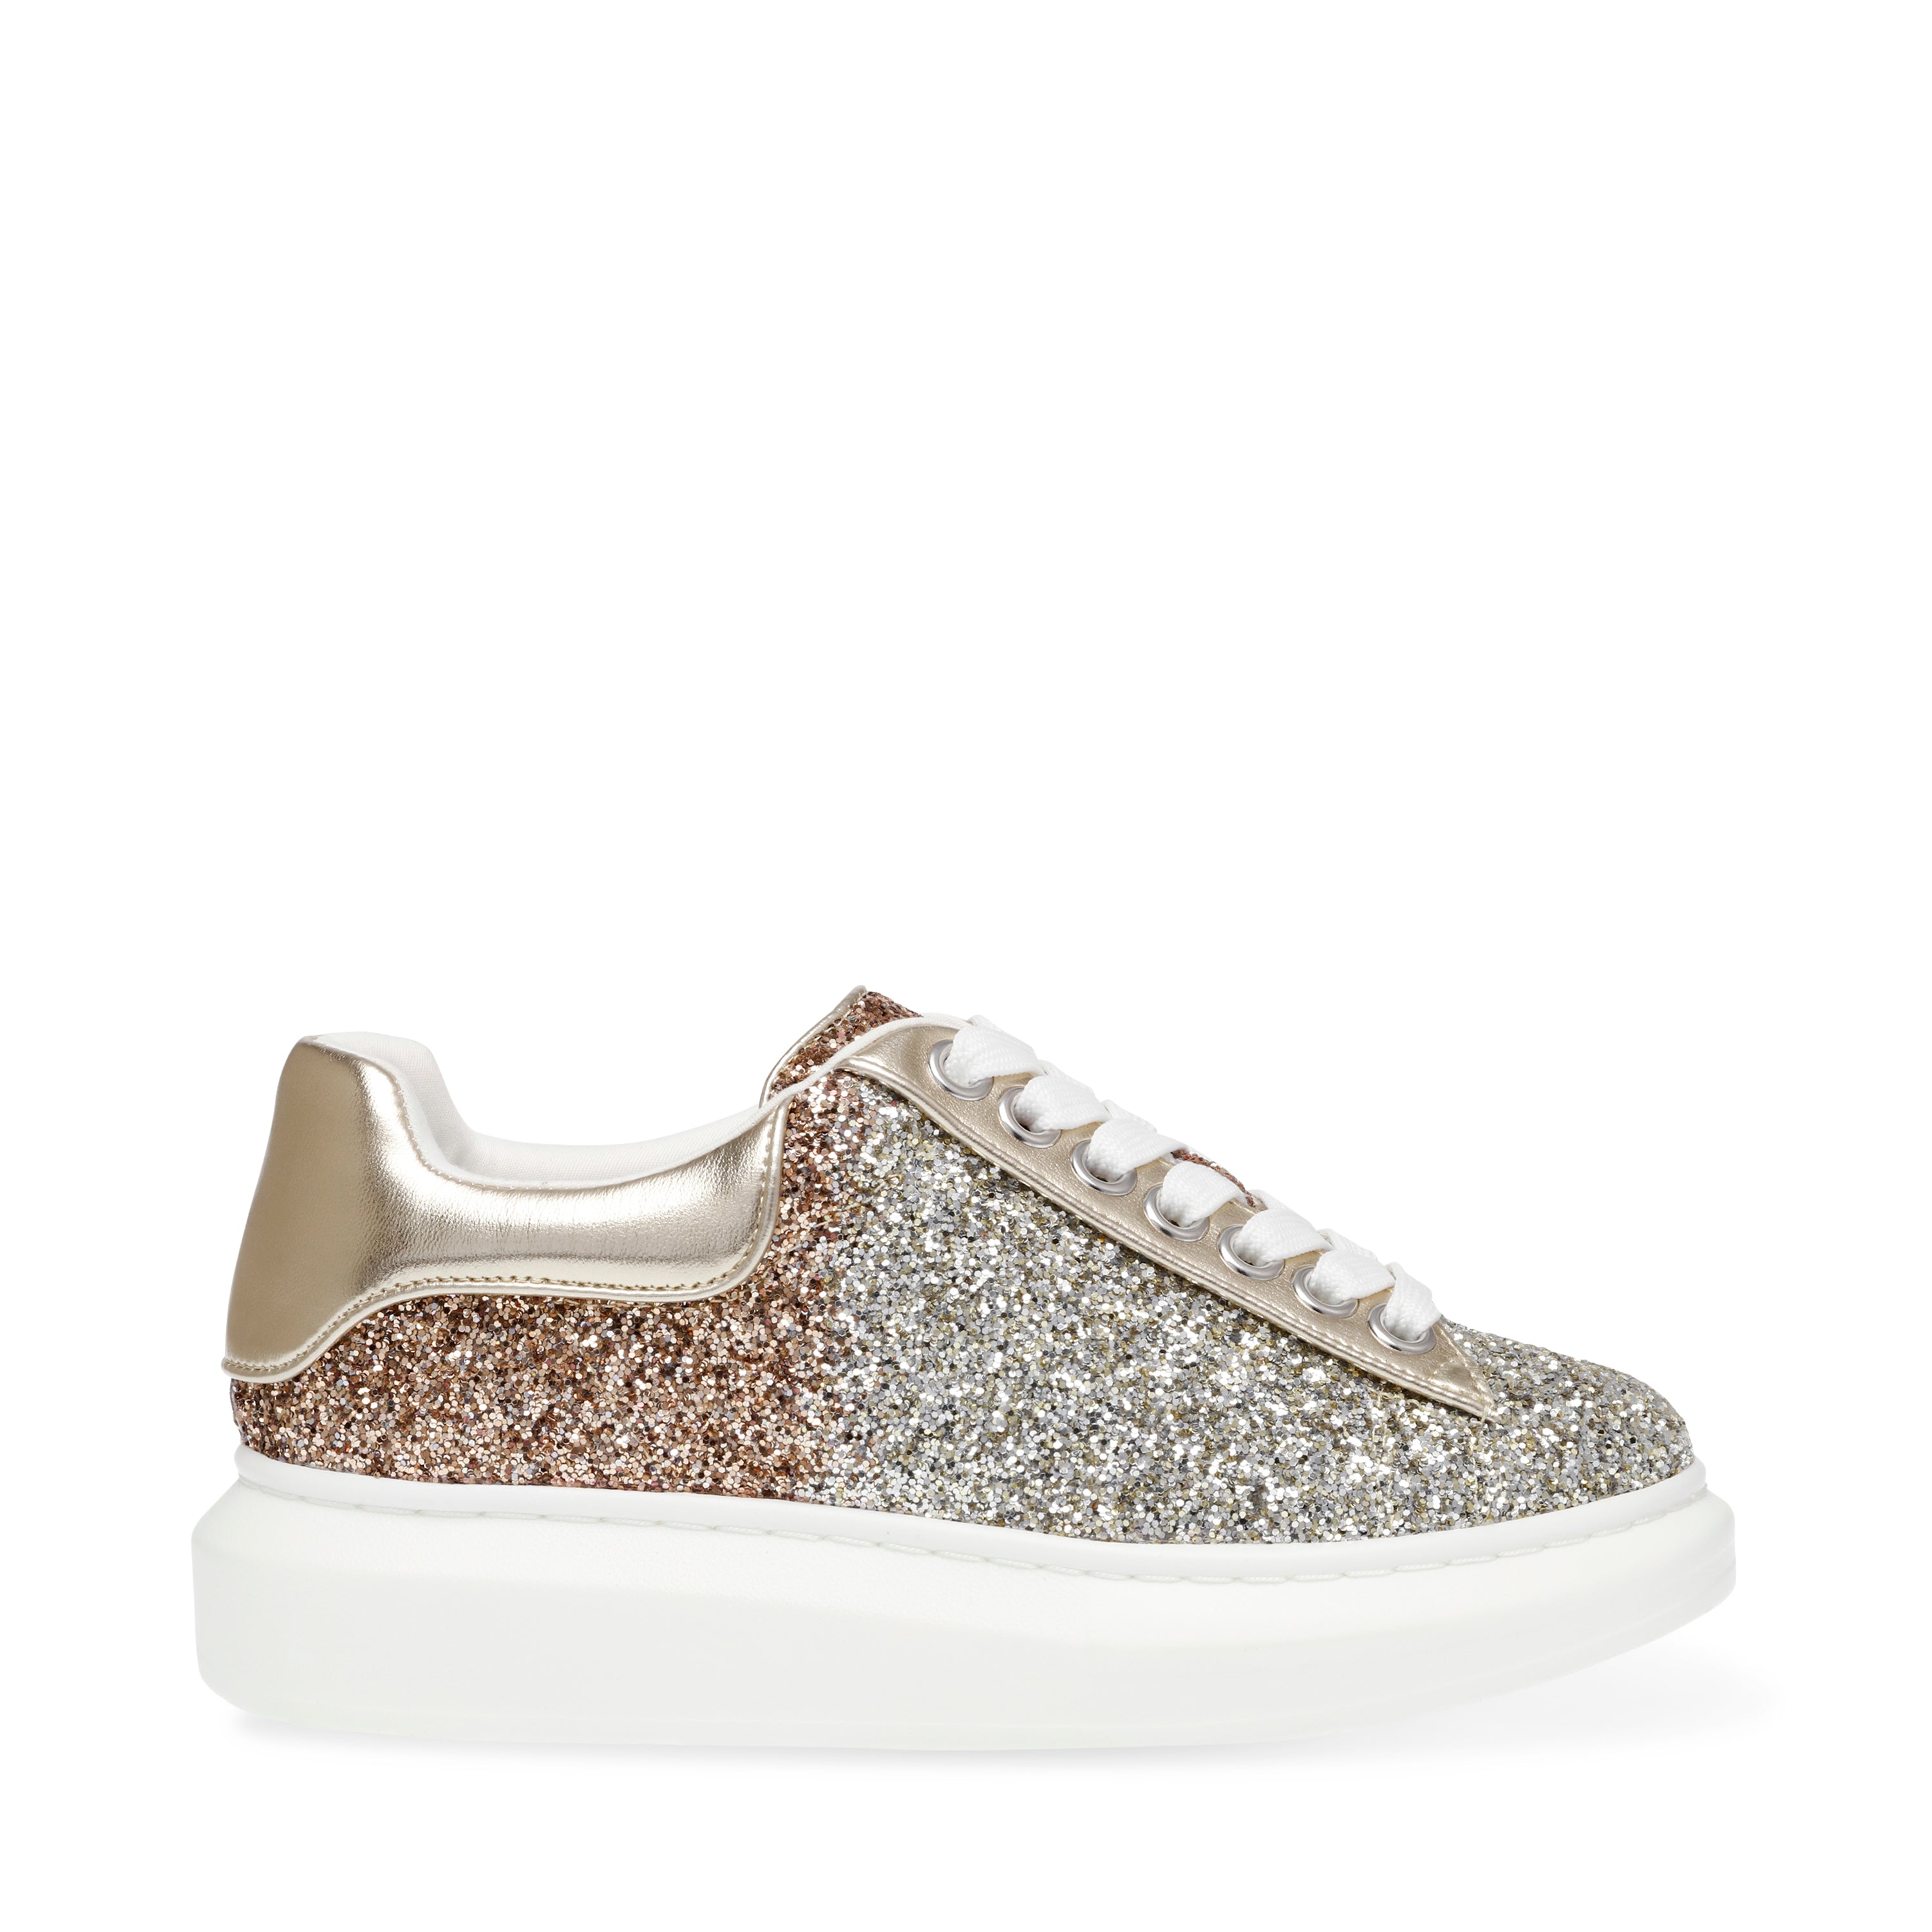 GLACER-G GOLD MULTI SNEAKERS